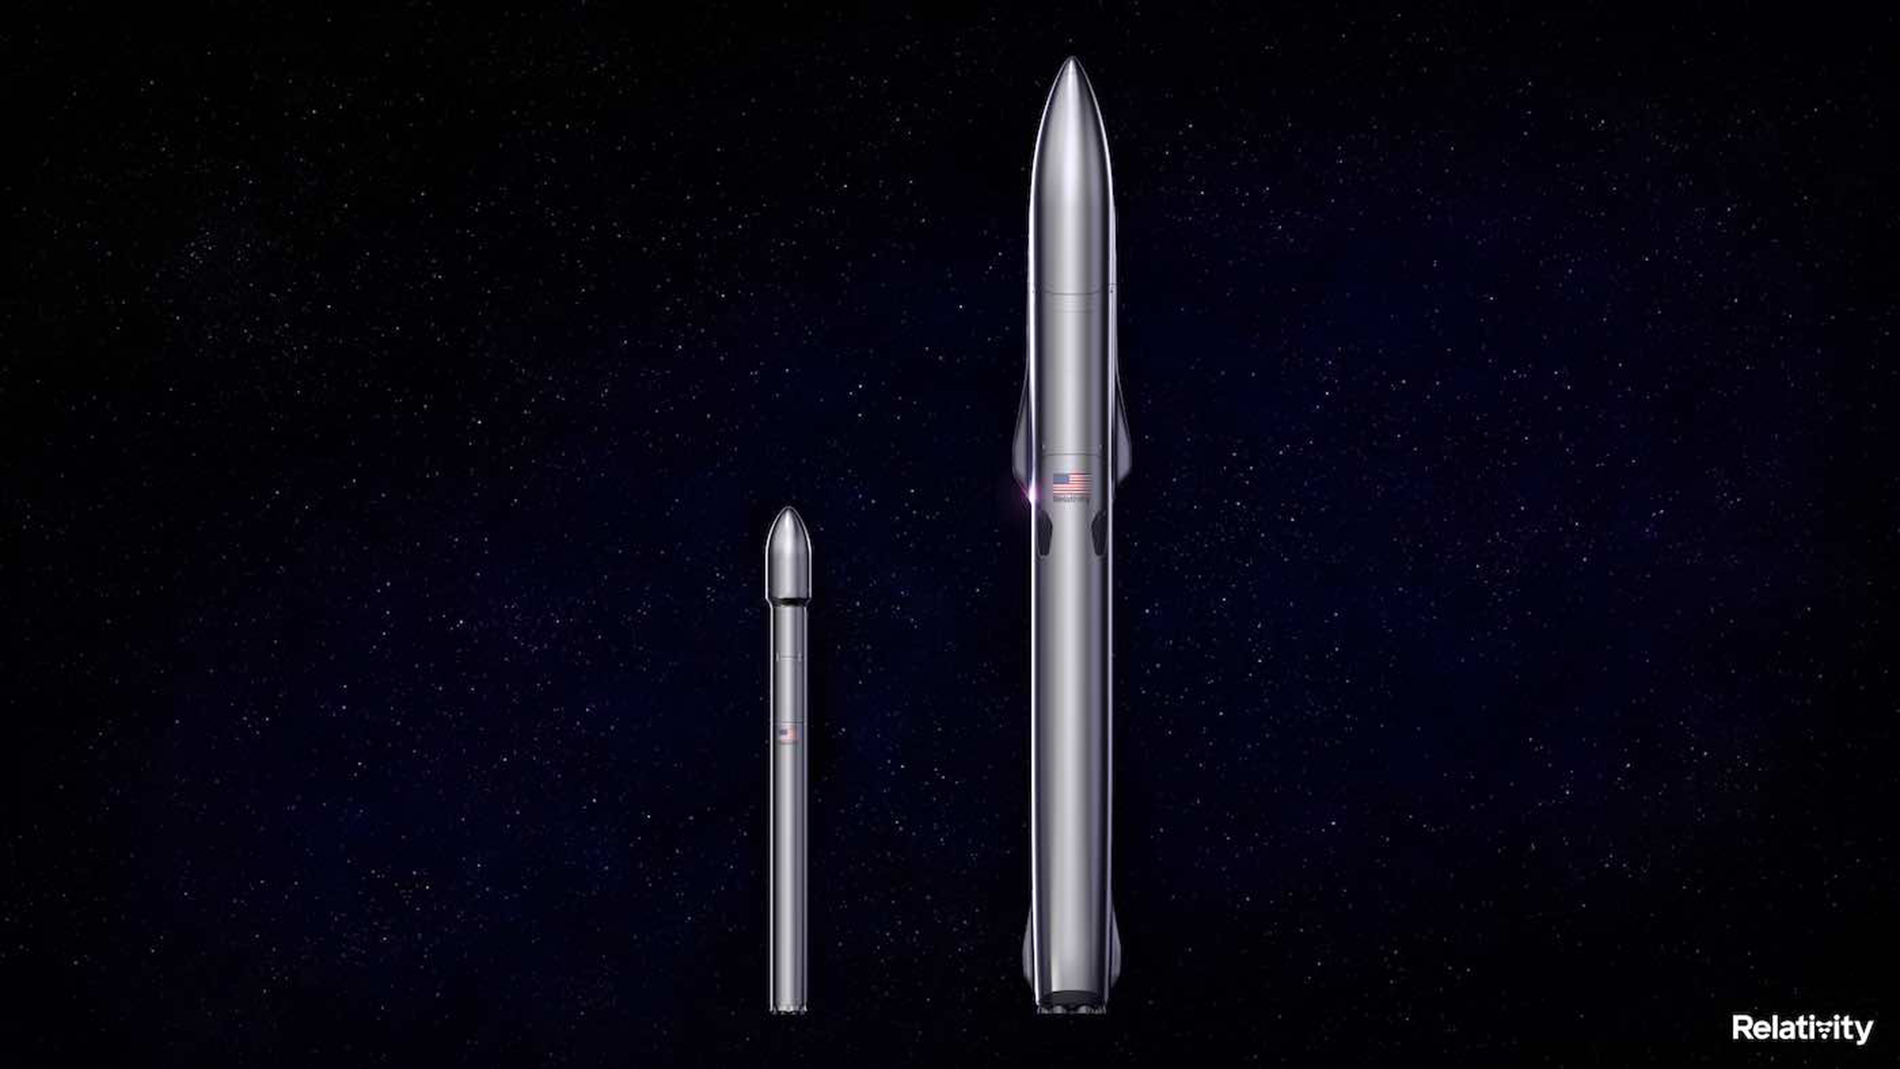 Illustration of Relativity’s Terran 1 and Terran R rockets. Image: Relativity Space